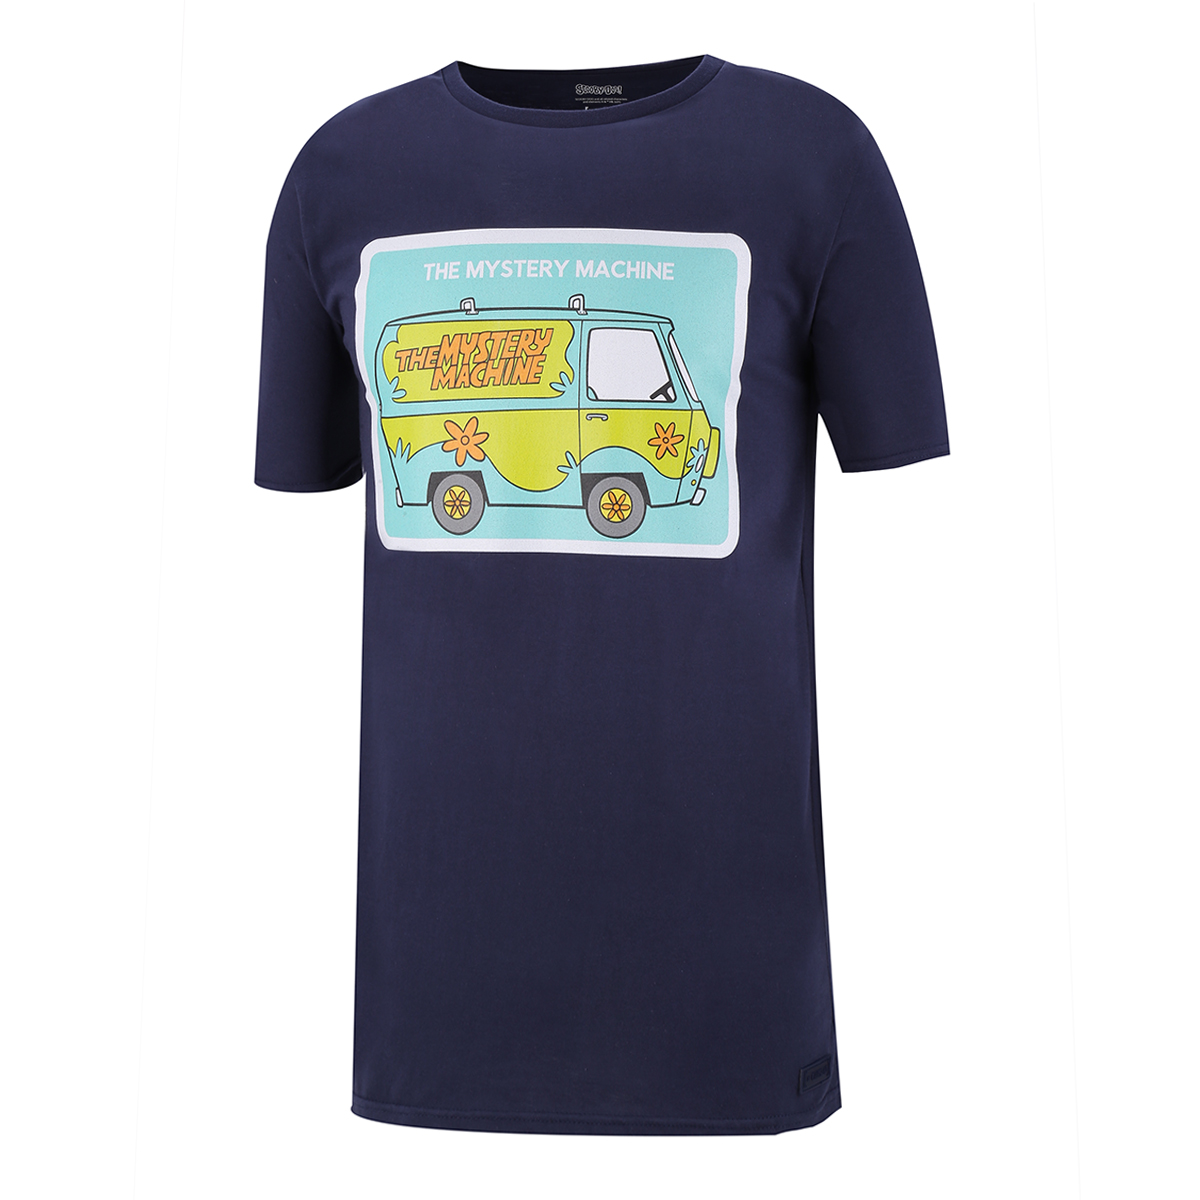 Remera Capslab Scooby Doo,  image number null